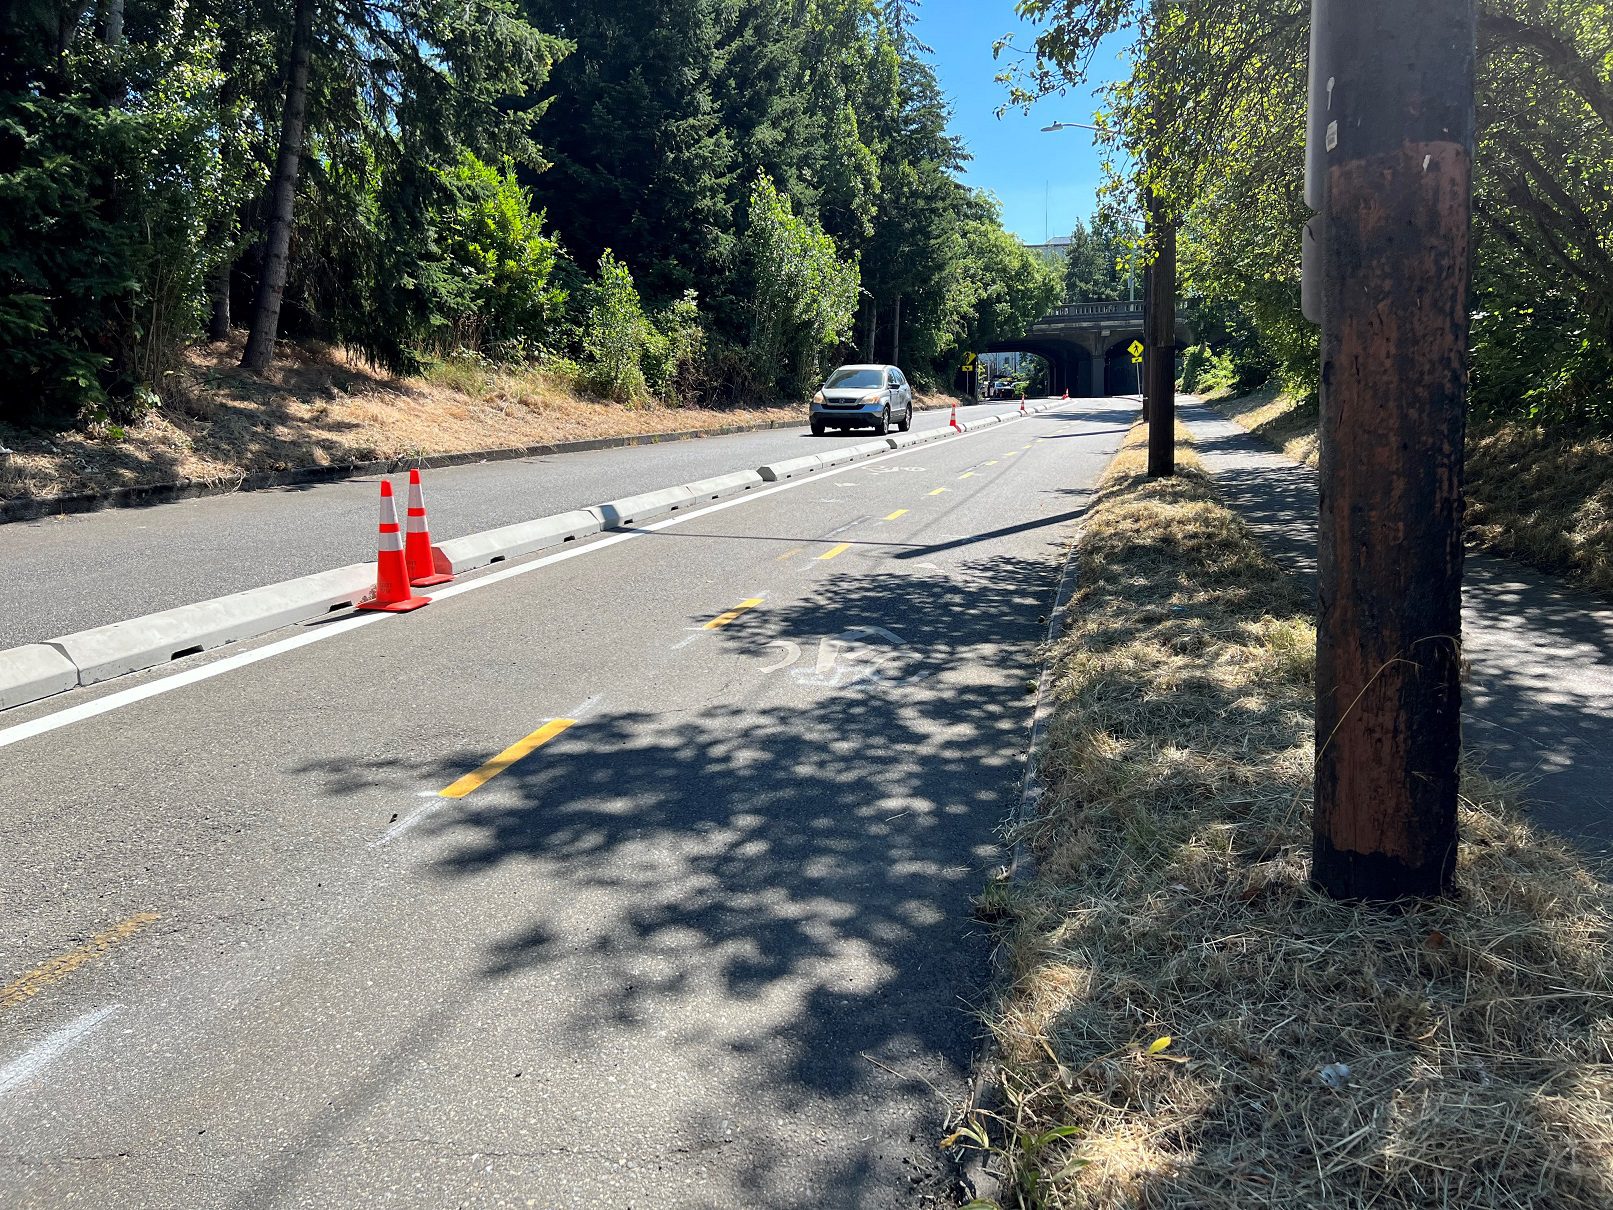 The protected bike lane on NE 40th St near the University Bridge with its new concrete parking-stop separators. Two orange cones are in the left side of the photo, with a car traveling in the background.